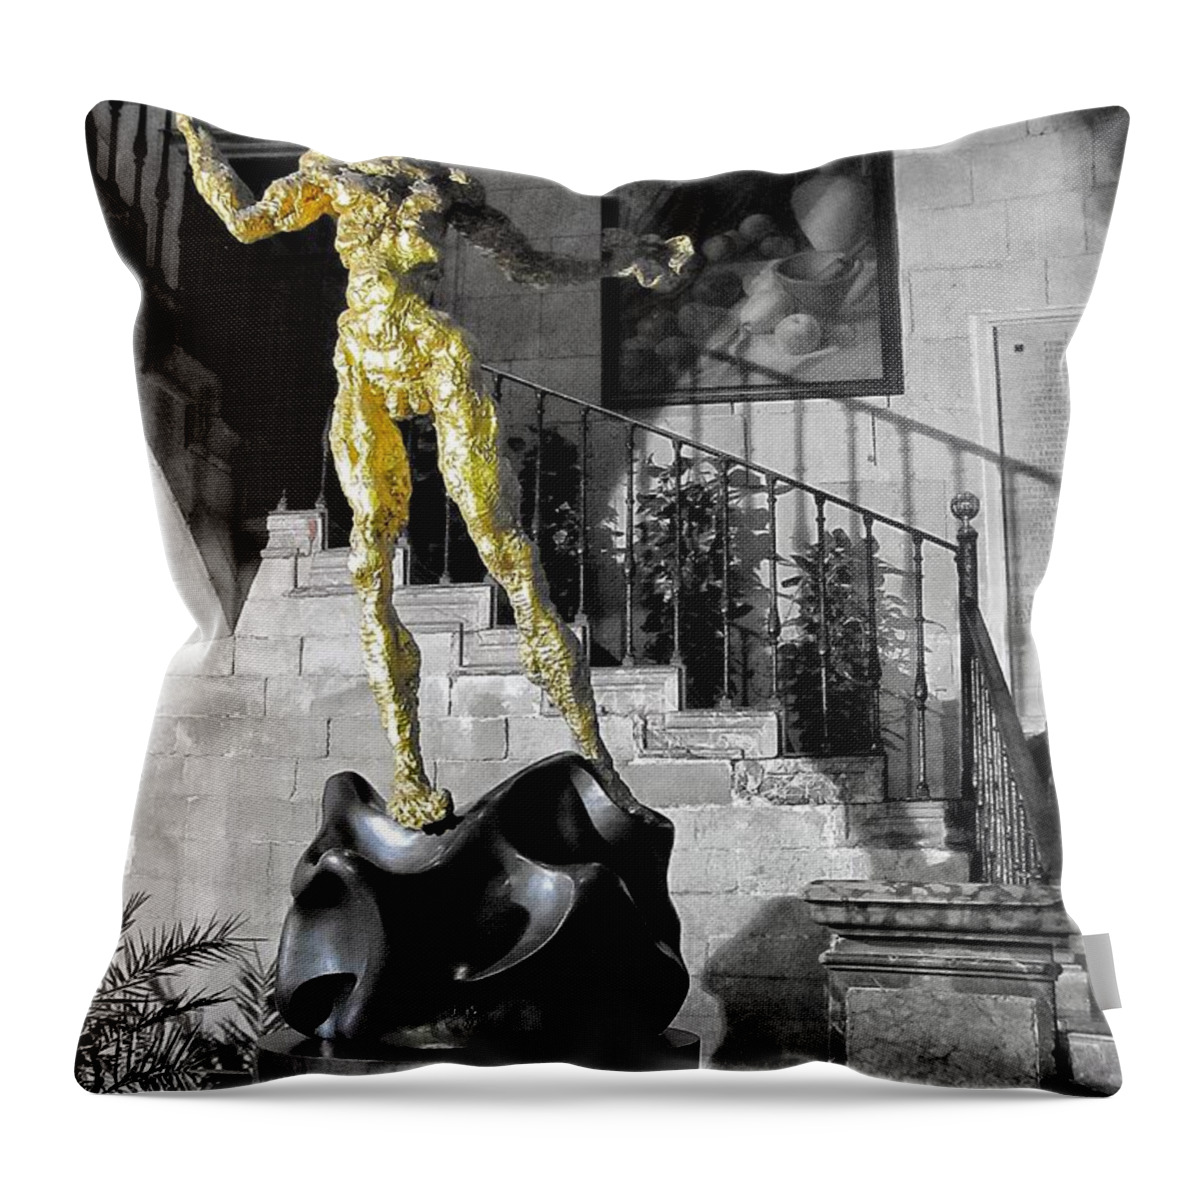 Salvador Dali Throw Pillow featuring the photograph Dali by Marianna Mills